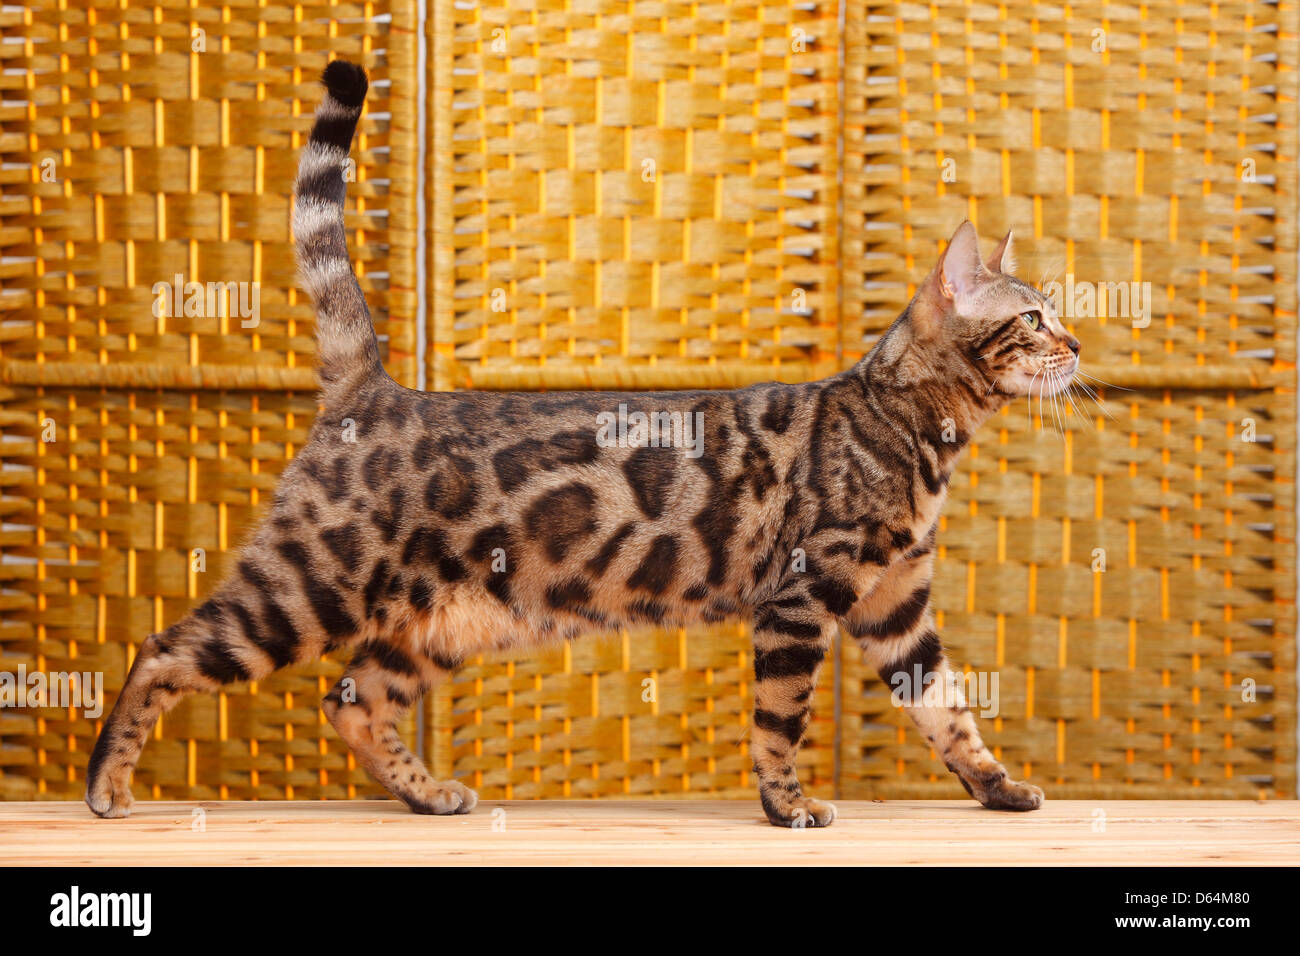 Bengal Cat / side |Bengalkatze / seitlich Stock Photo